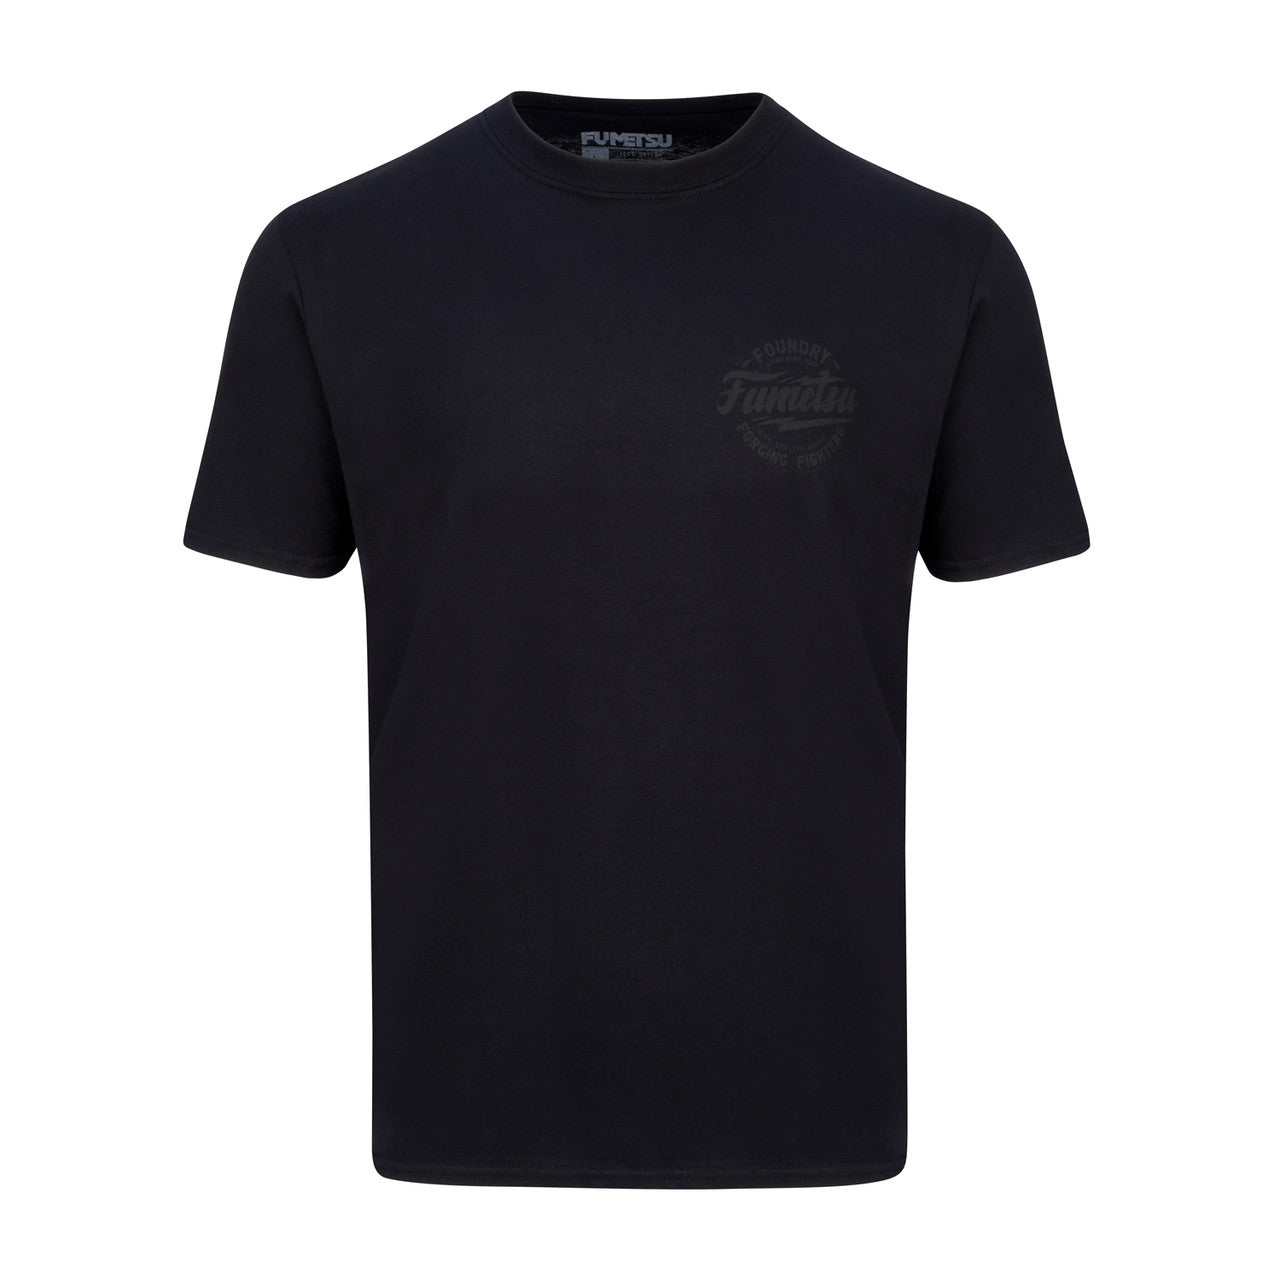 The Forge T-Shirt Black from Fumetsu